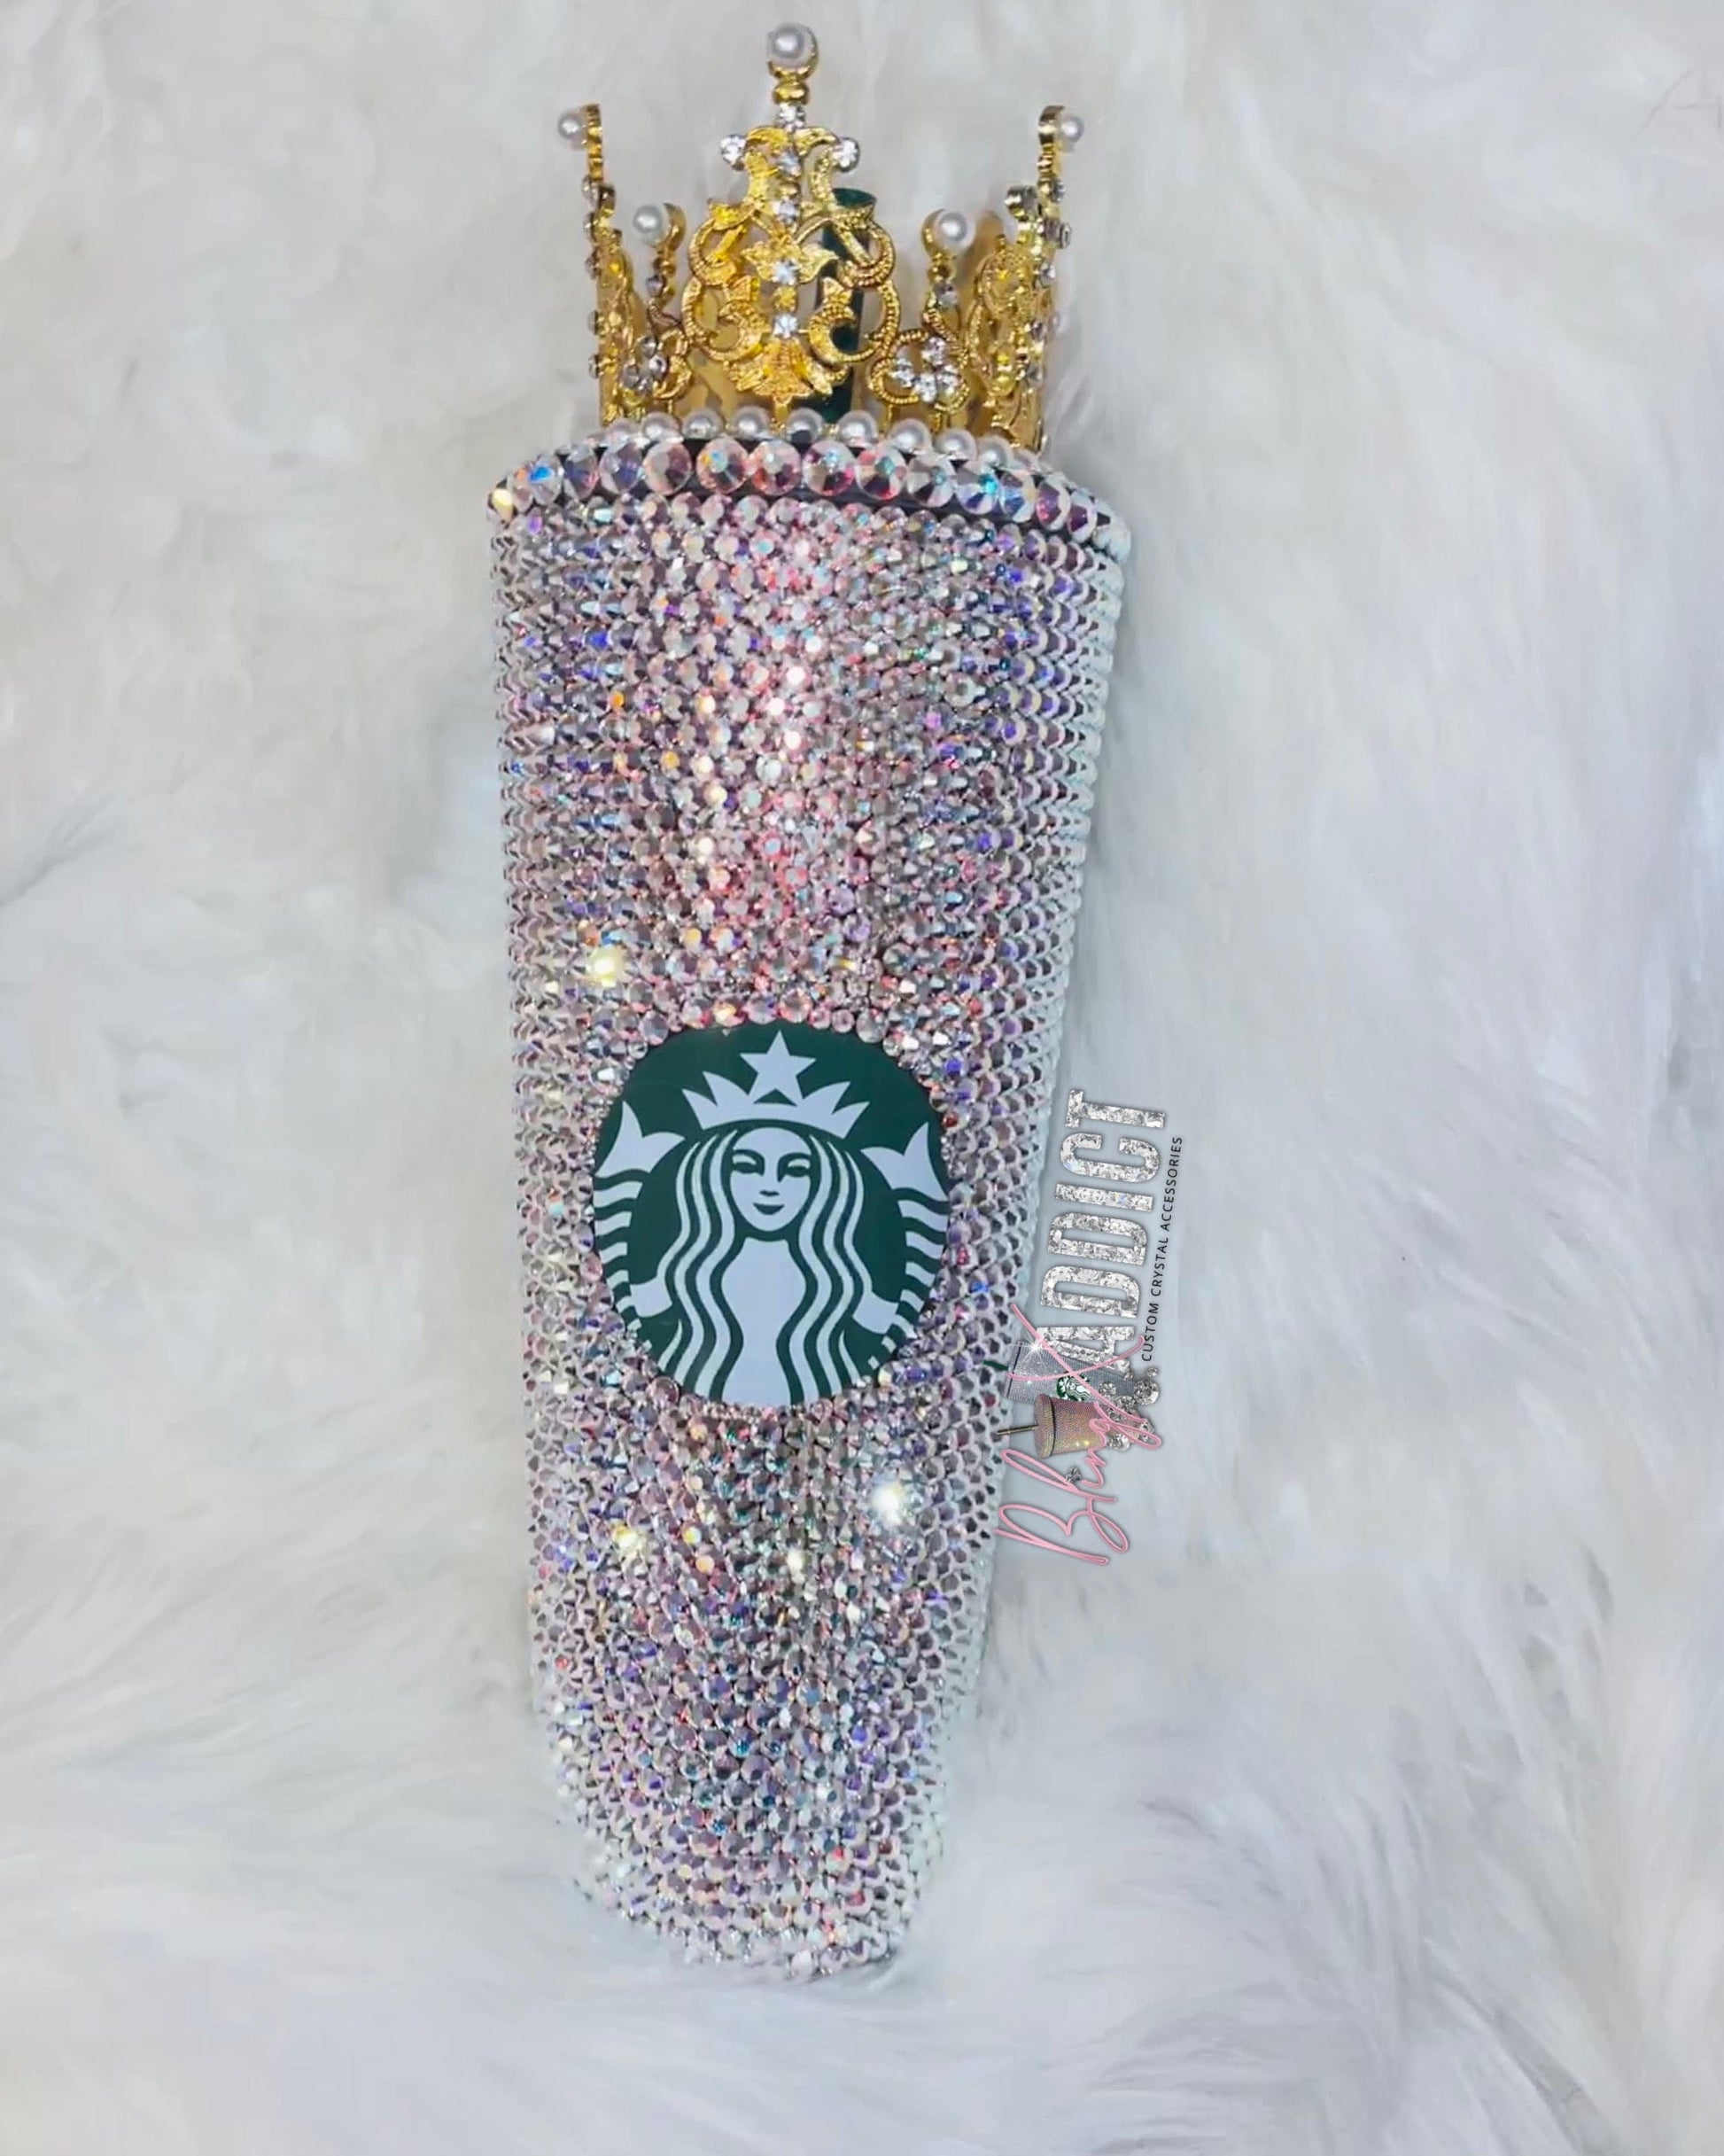 Cristal AB Starbucks Bling Tumbler, Personalized Luxury Cup